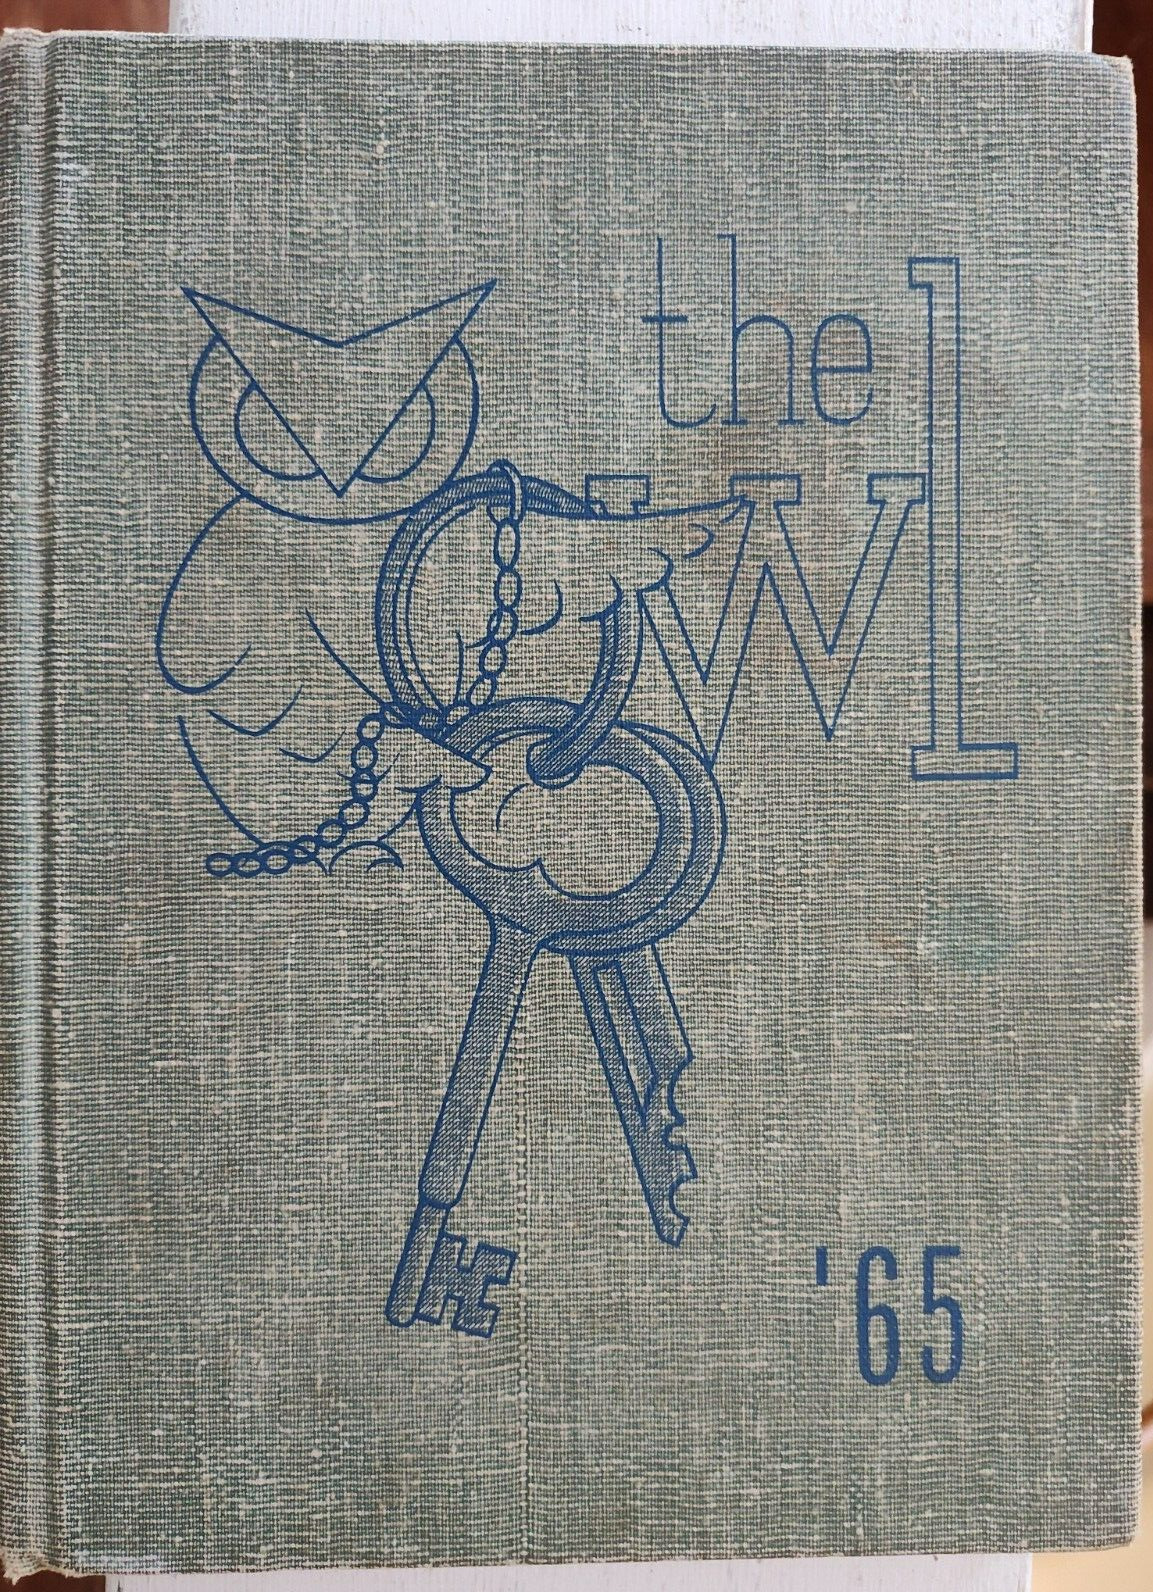 1965 Westminster MD High School Yearbook - THE OWL